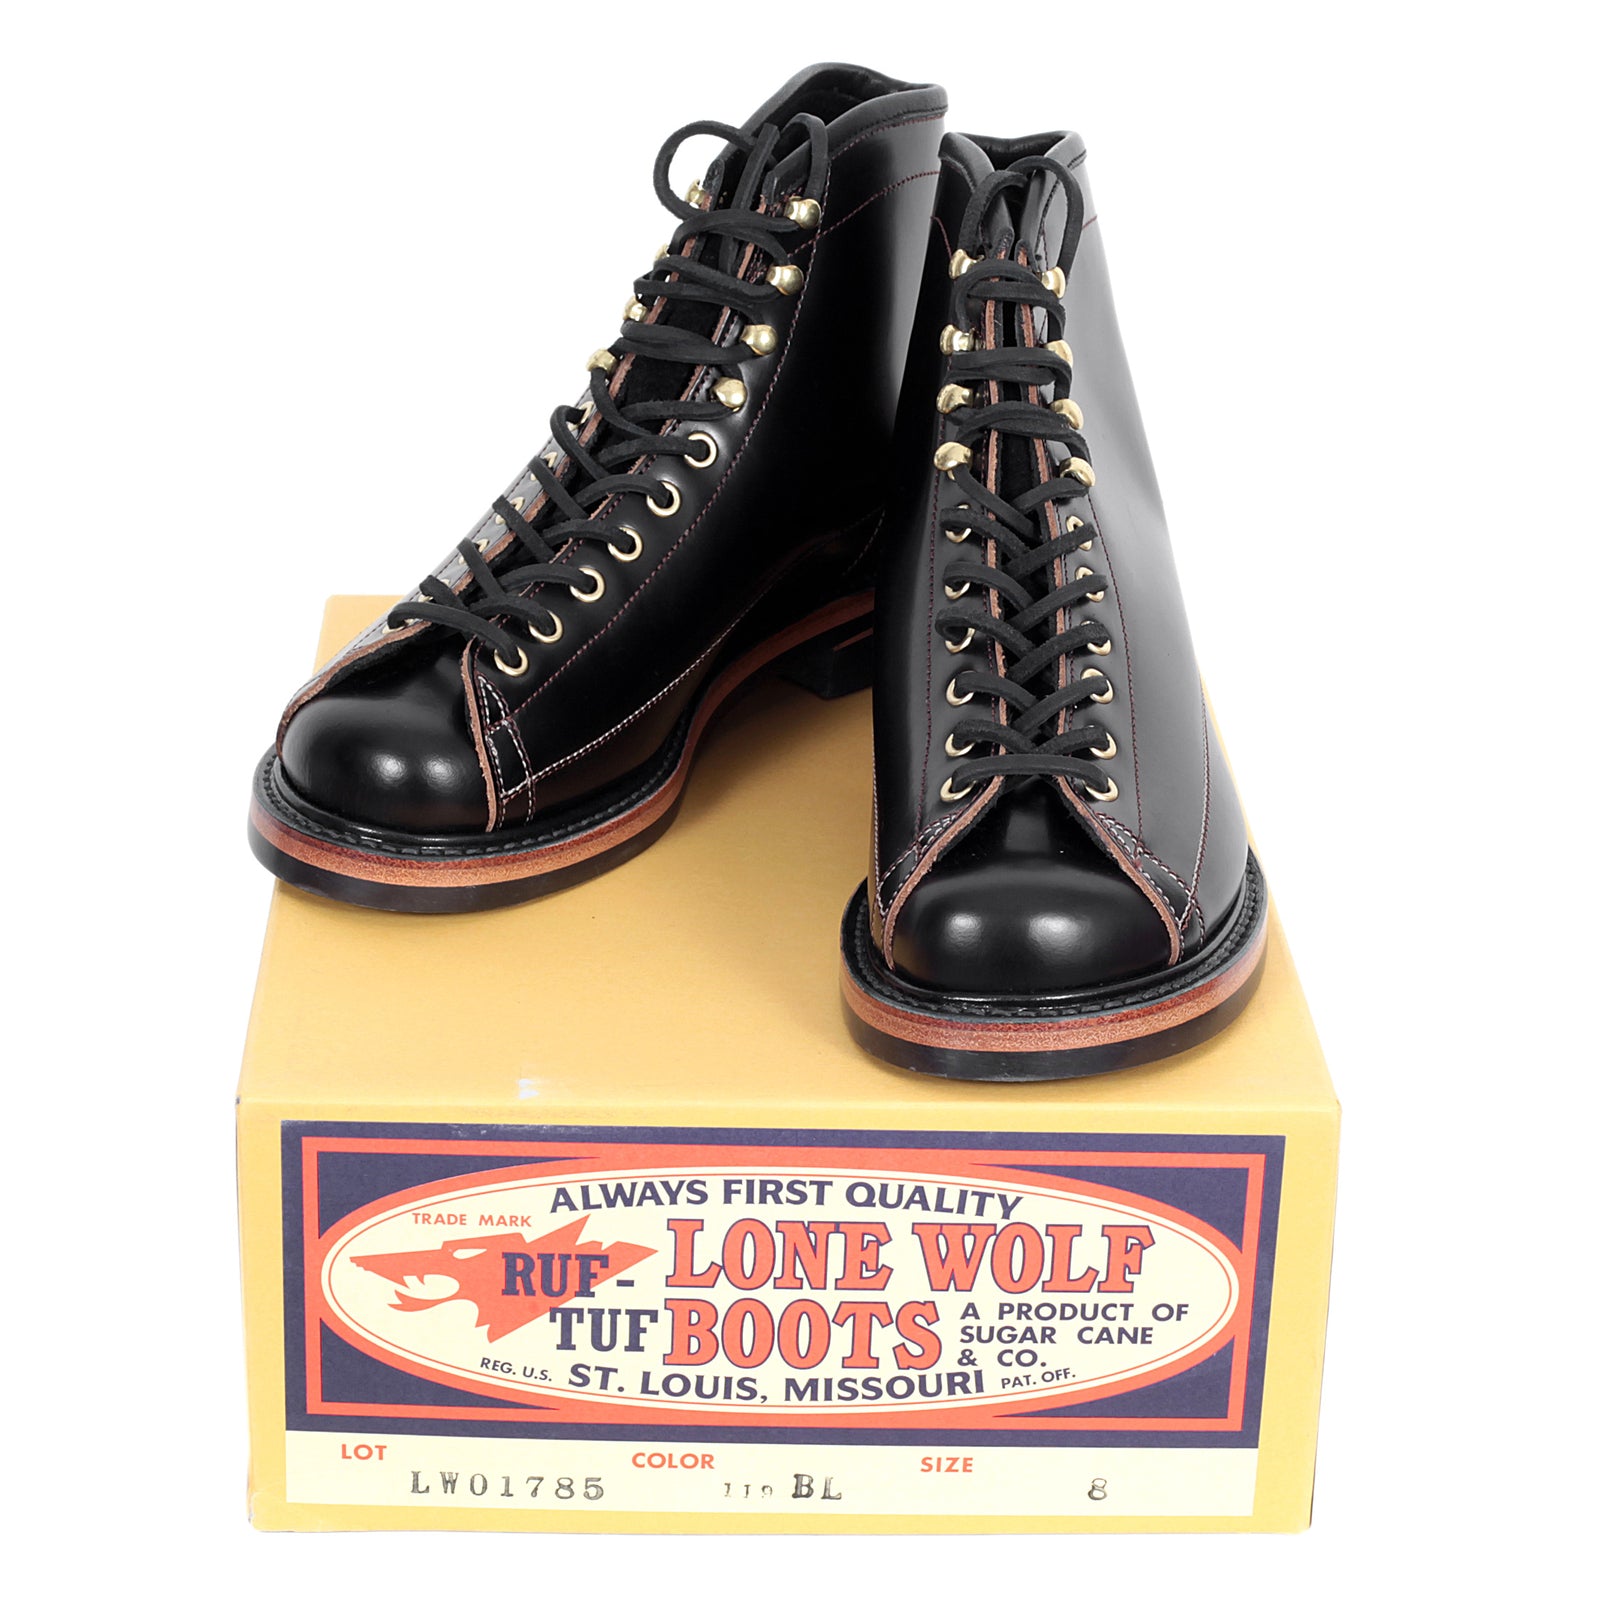 Lone Wolf Mens Black Leather Calf High LW01785 Goodyear Welted